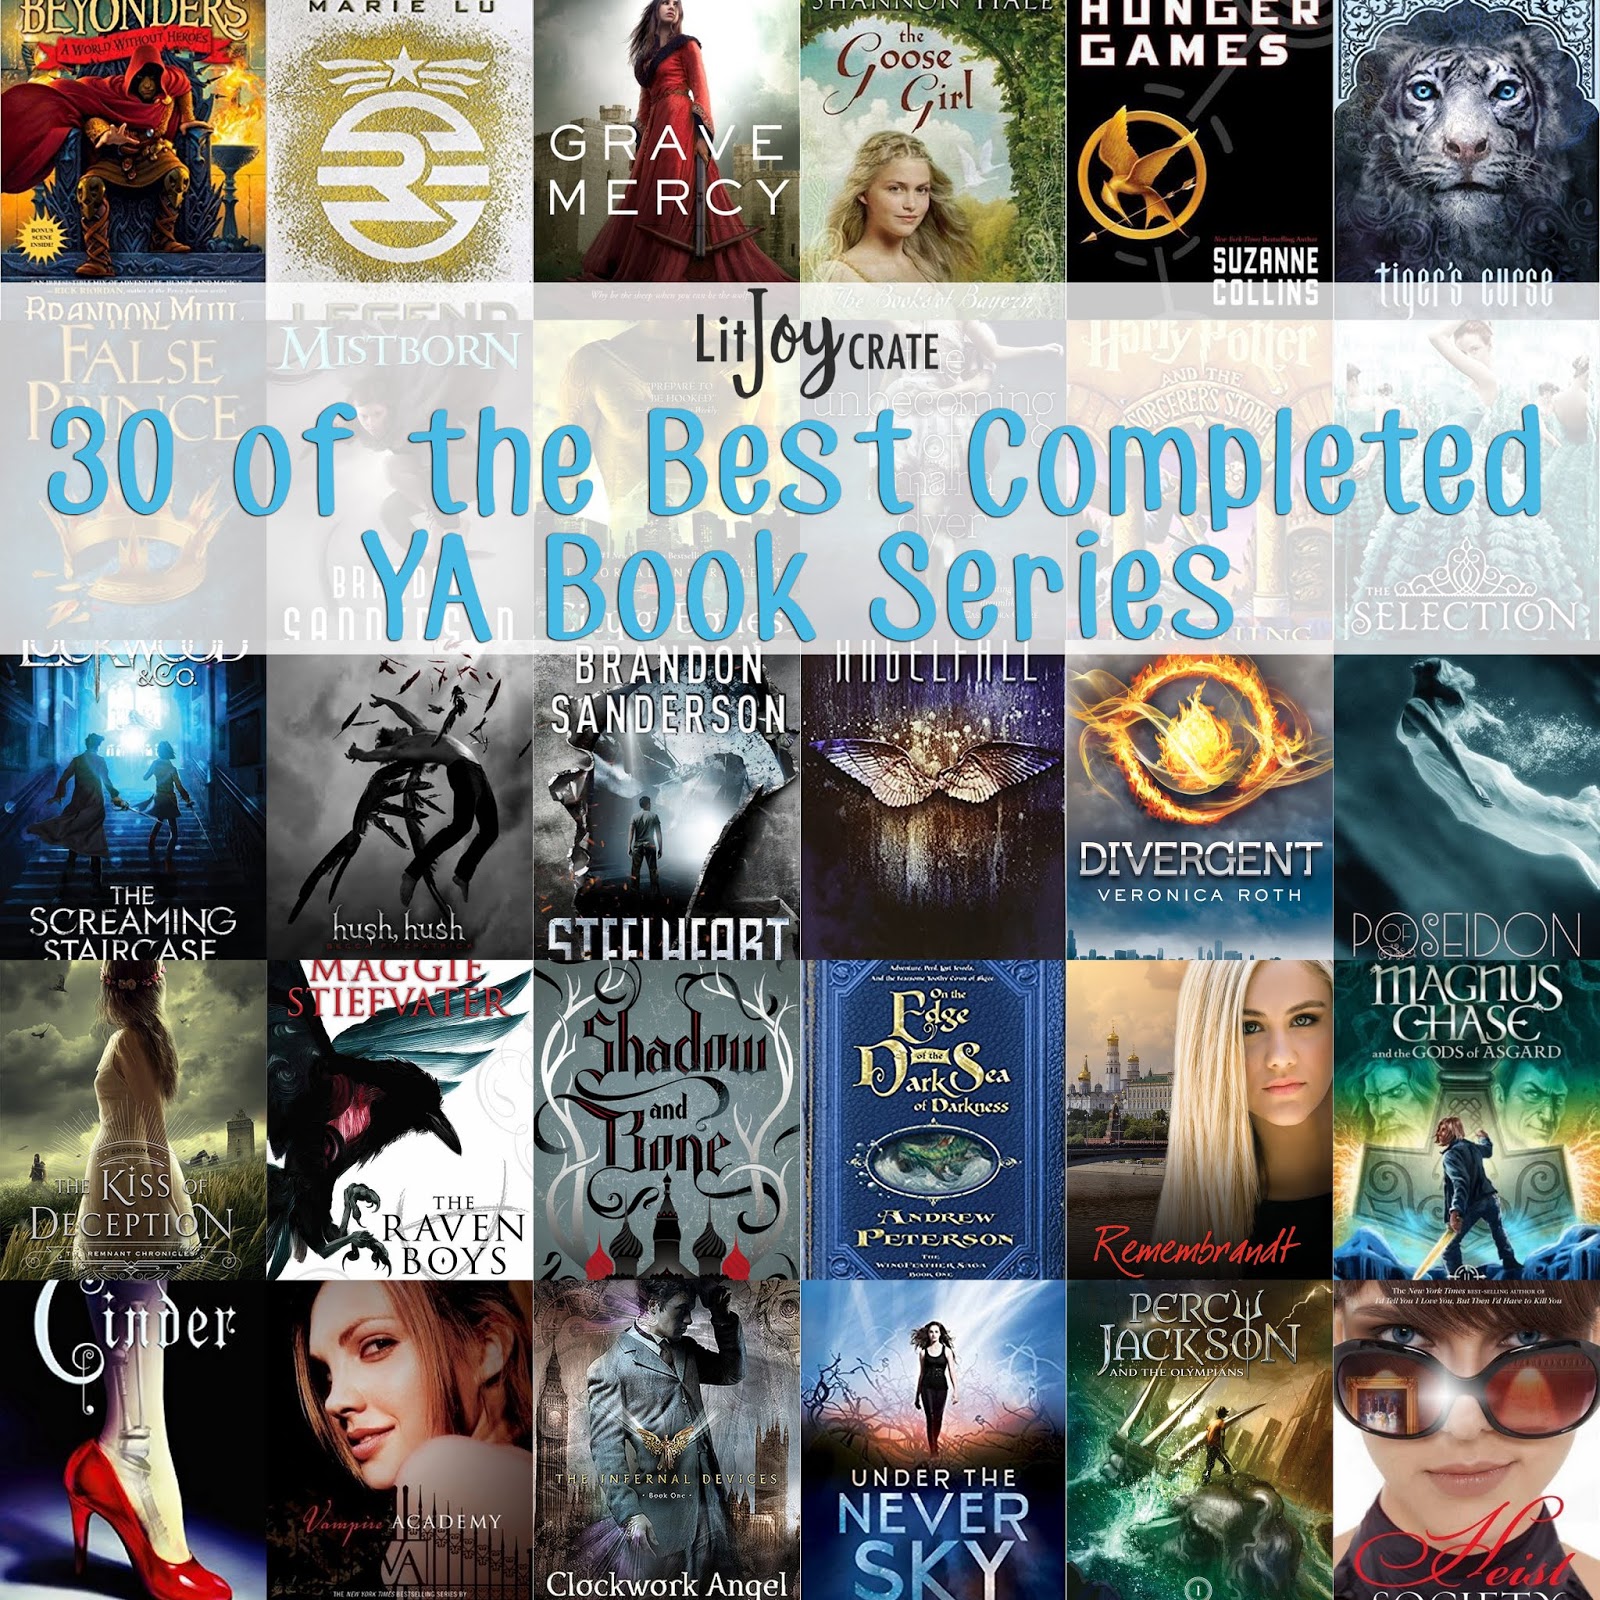 Author Robin King, Blog 30 OF THE BEST COMPLETED YA BOOK SERIES